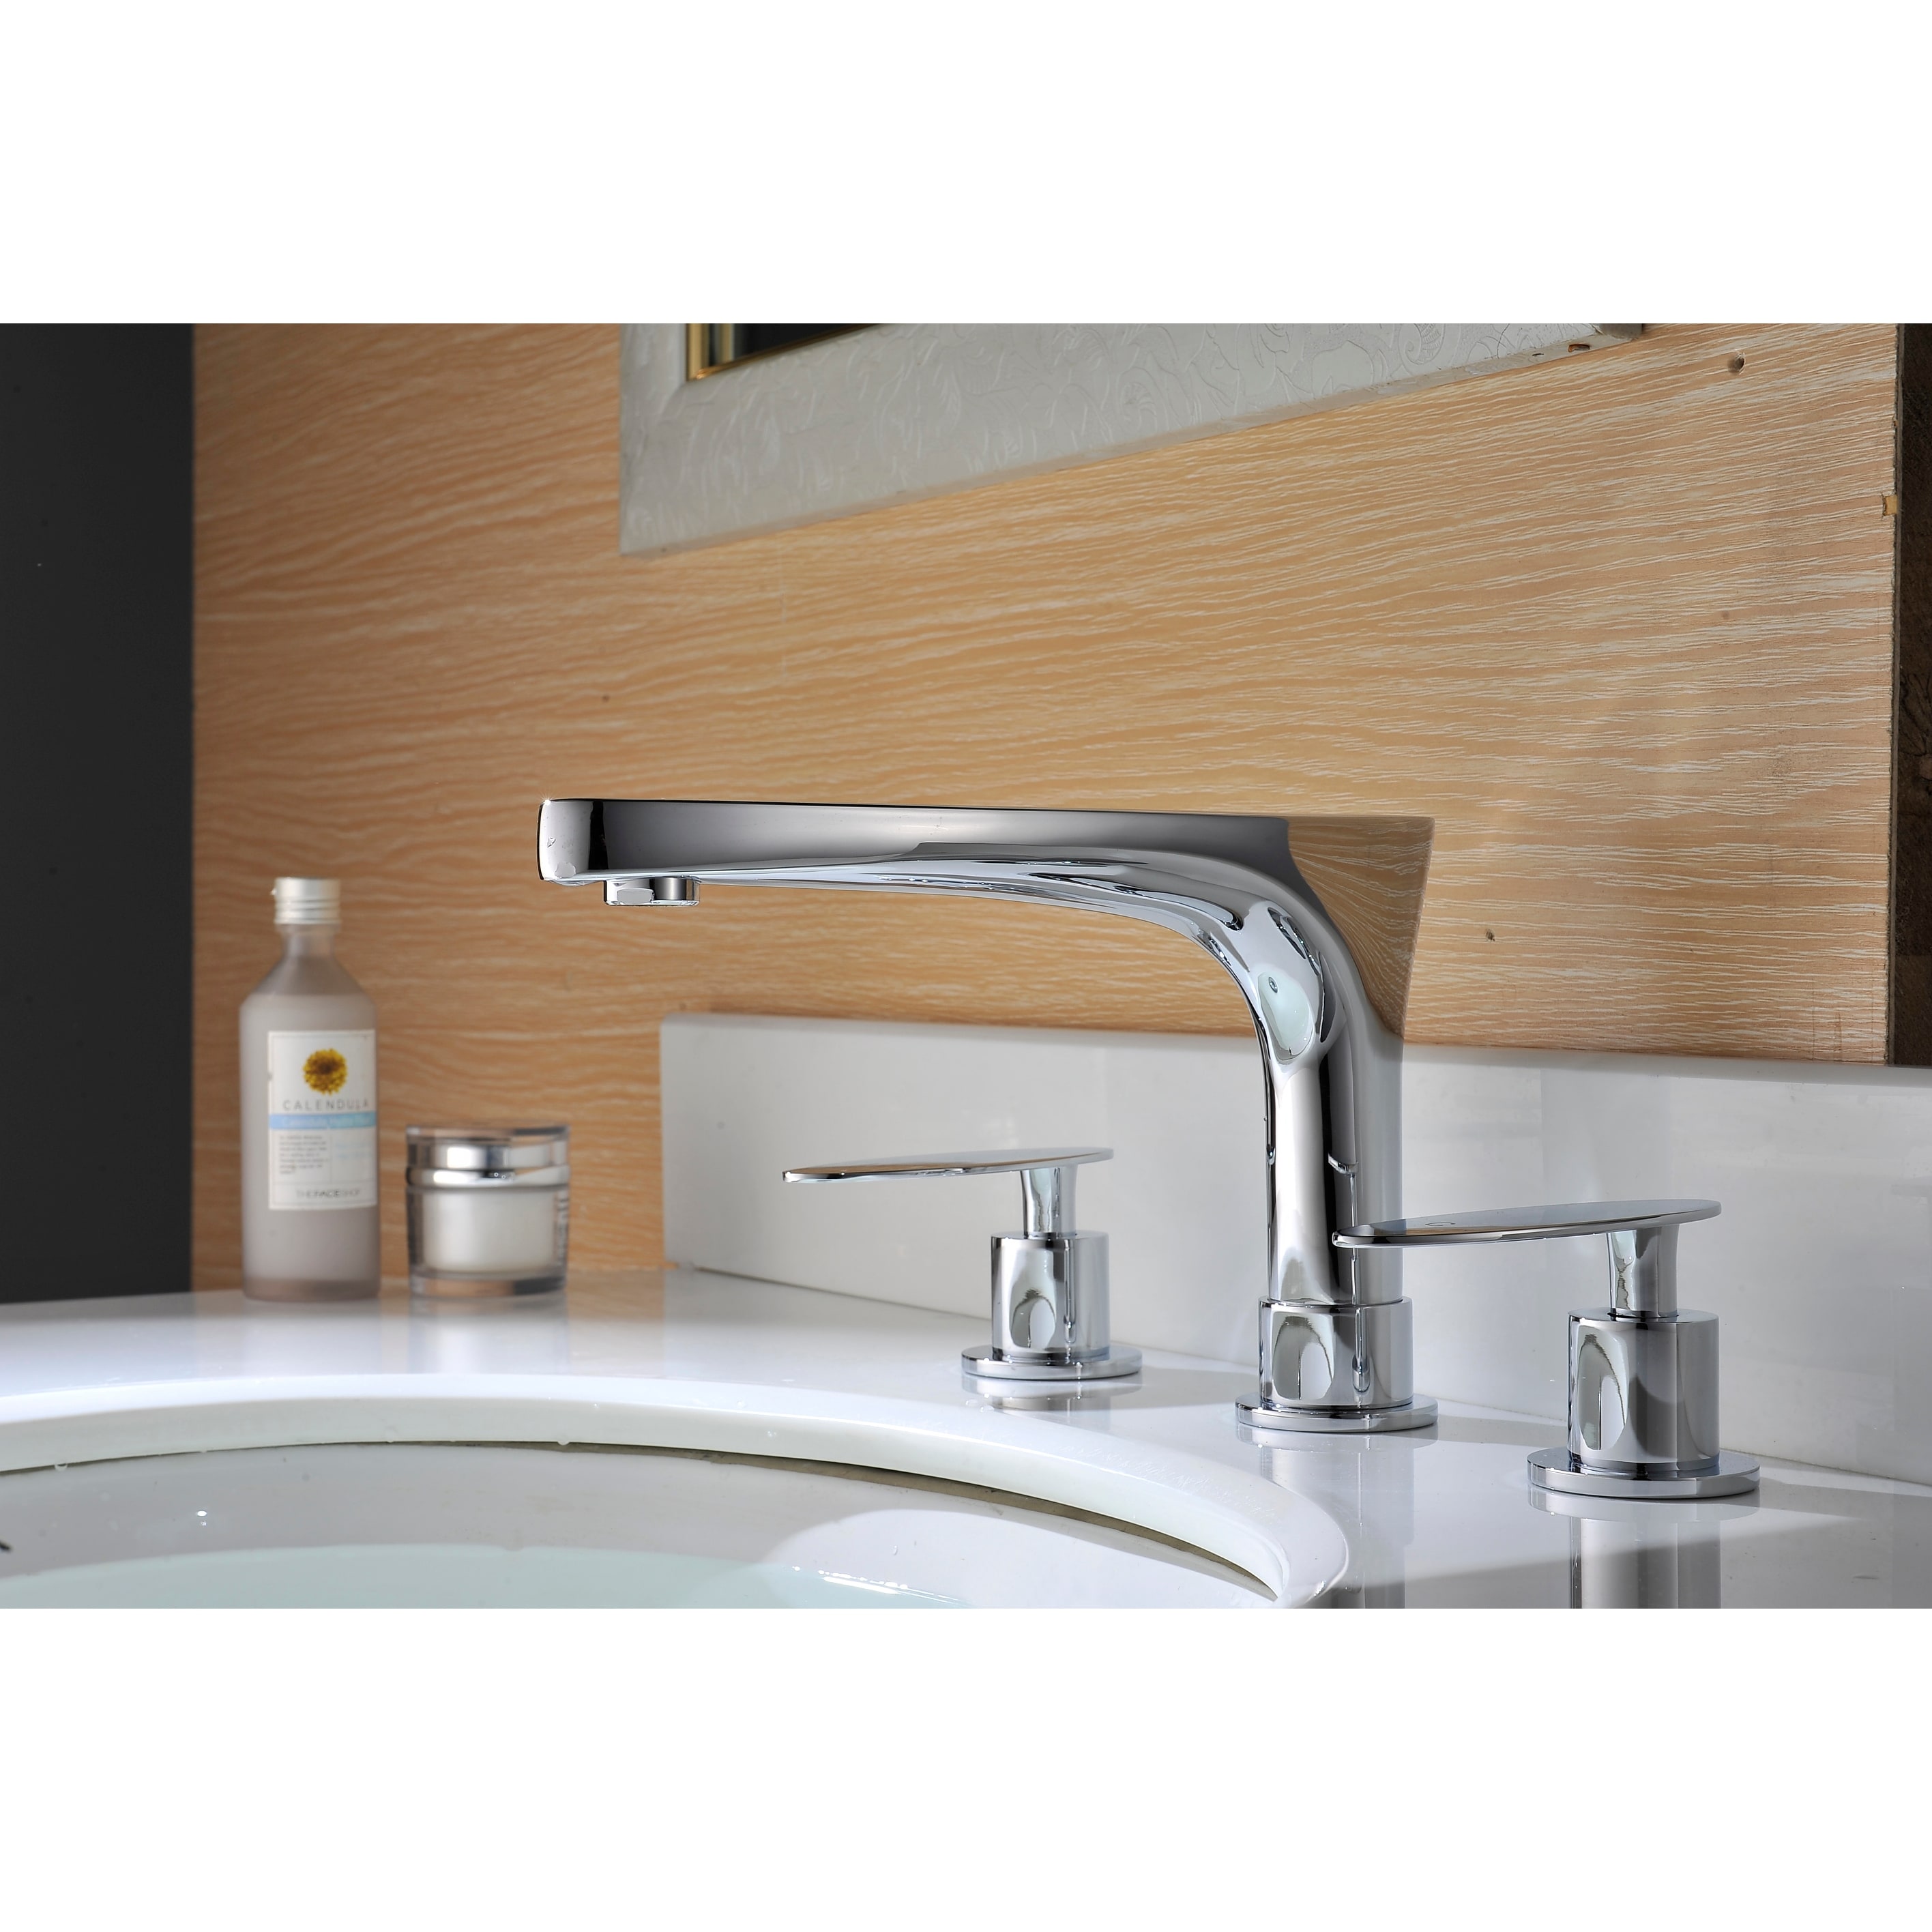 https://ak1.ostkcdn.com/images/products/is/images/direct/d65e6885ef0ac51eb97c0b05e92c2a6f77274716/15.25-in.-W-Round-Undermount-Sink-Set-In-White---Chrome-Hardware-With-3H8-in.-CUPC-Faucet.jpg